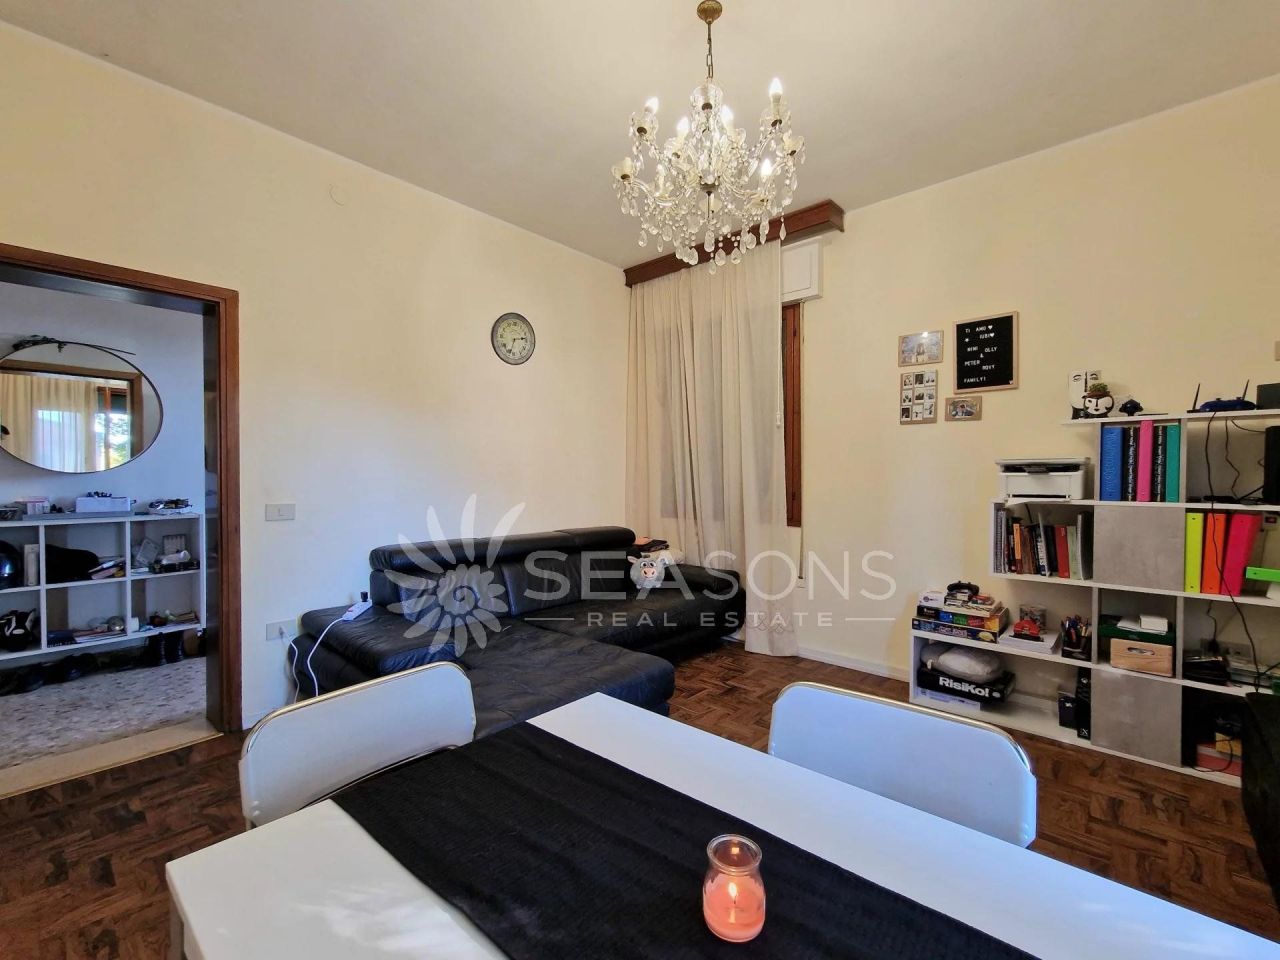 Flat in Musile di Piave, Italy, 110 sq.m - picture 1